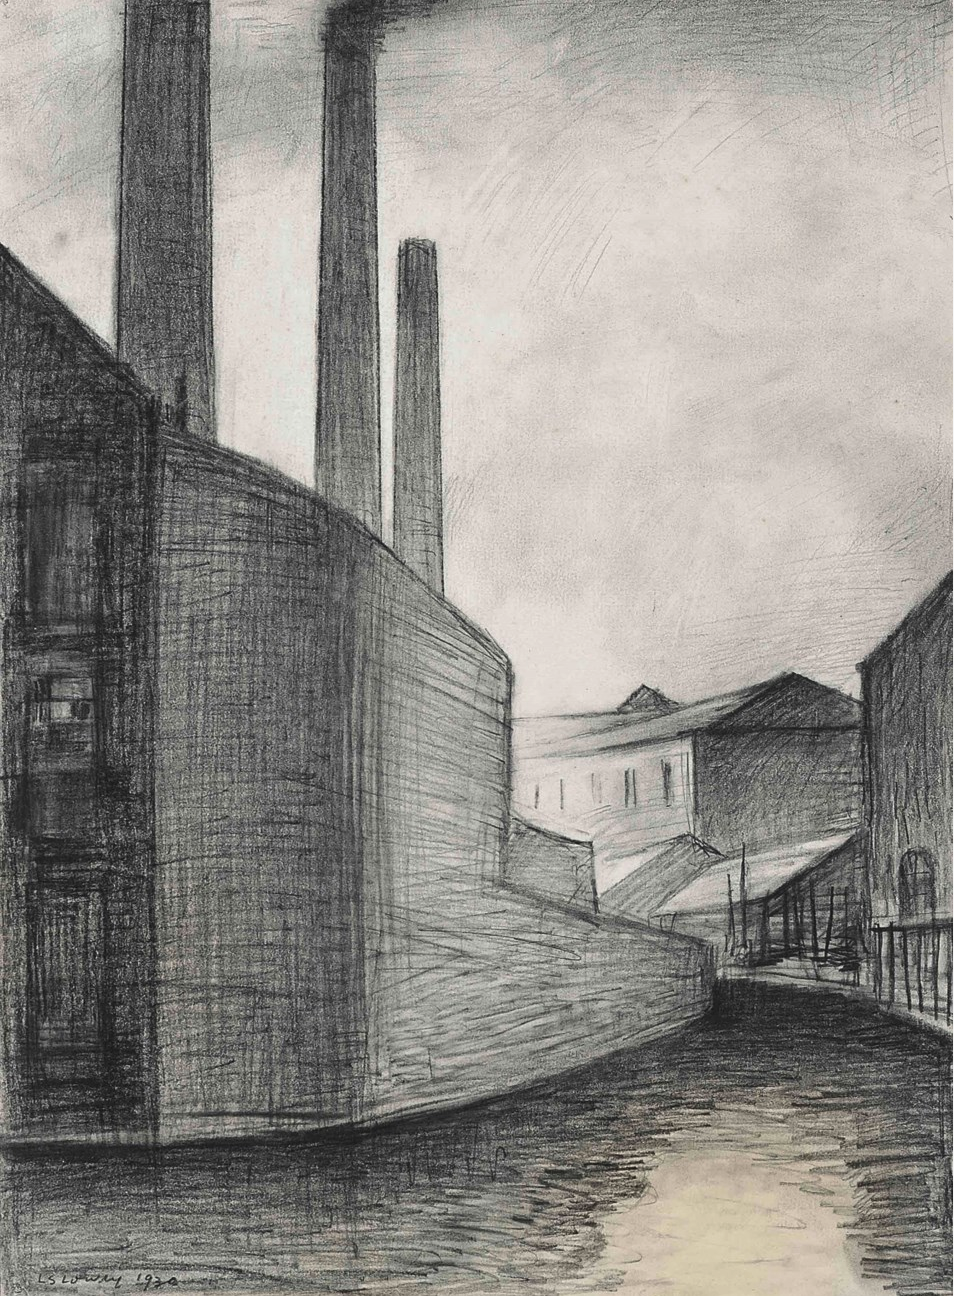 The Canal, Ancoats, Manchester (1930) by Laurence Stephen Lowry (1887 - 1976), English artist.